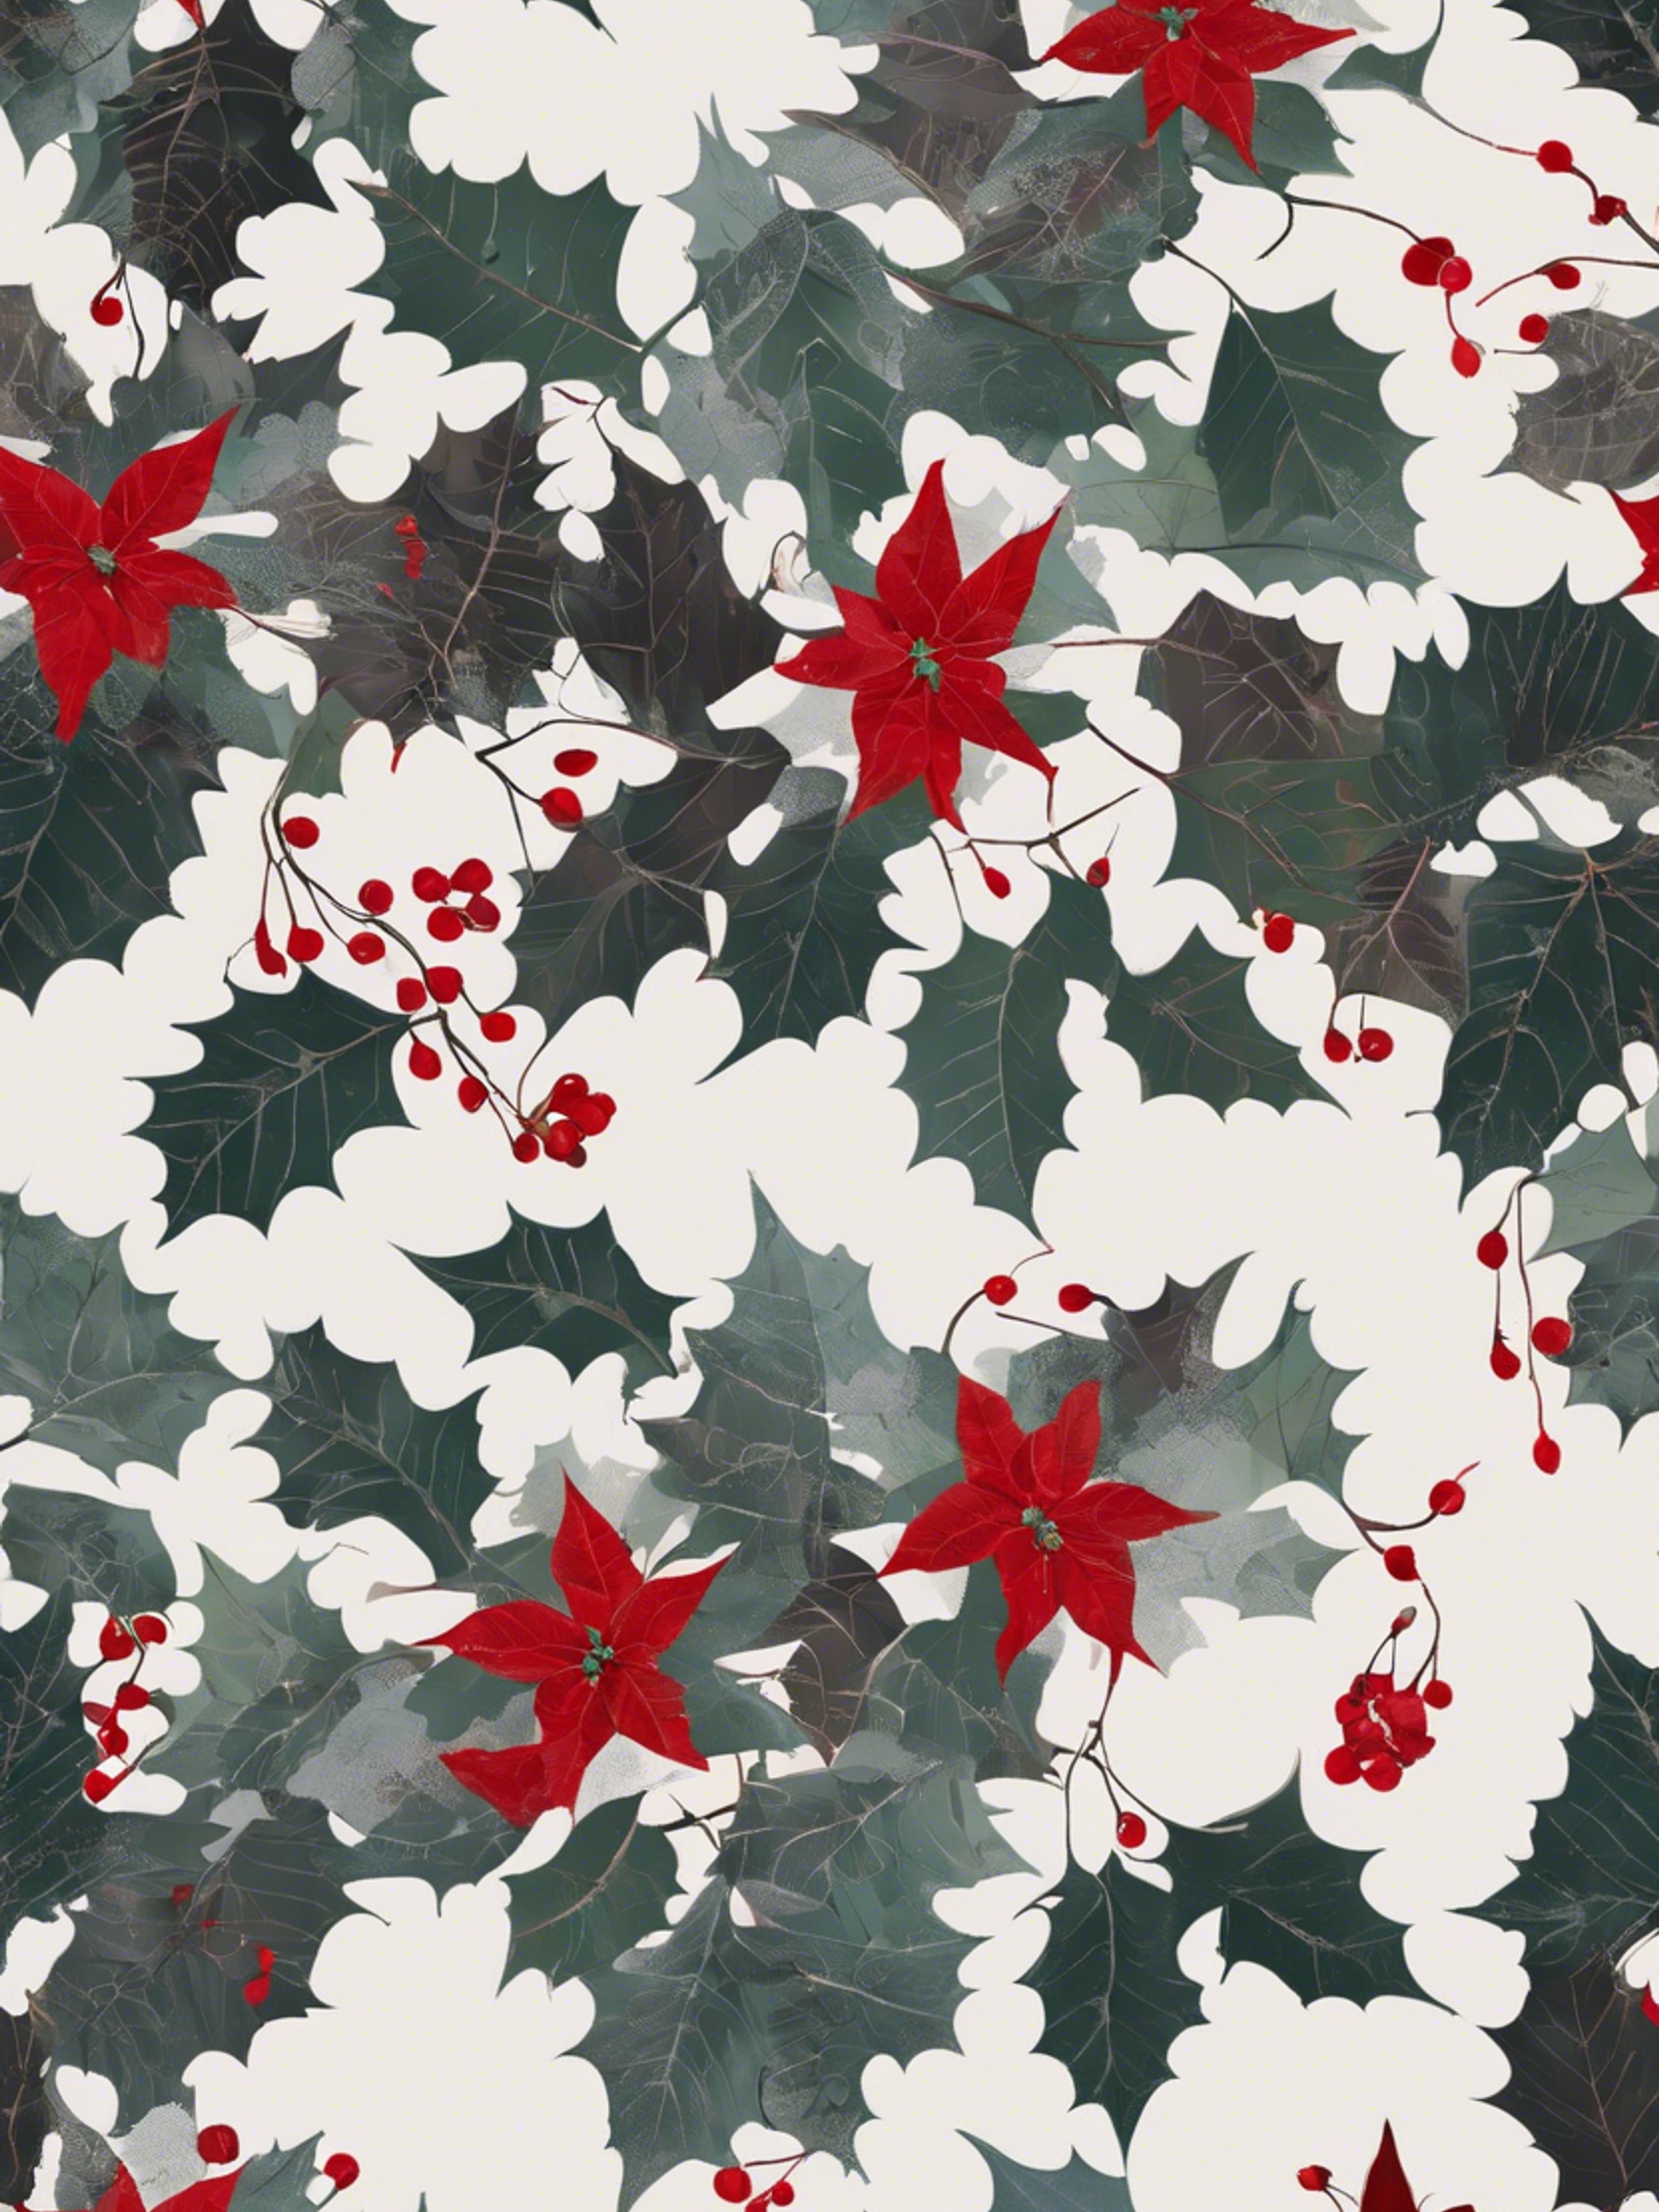 A winter-themed floral pattern with silhouettes of holly and poinsettias.壁紙[6578f1af282648ffbf9d]